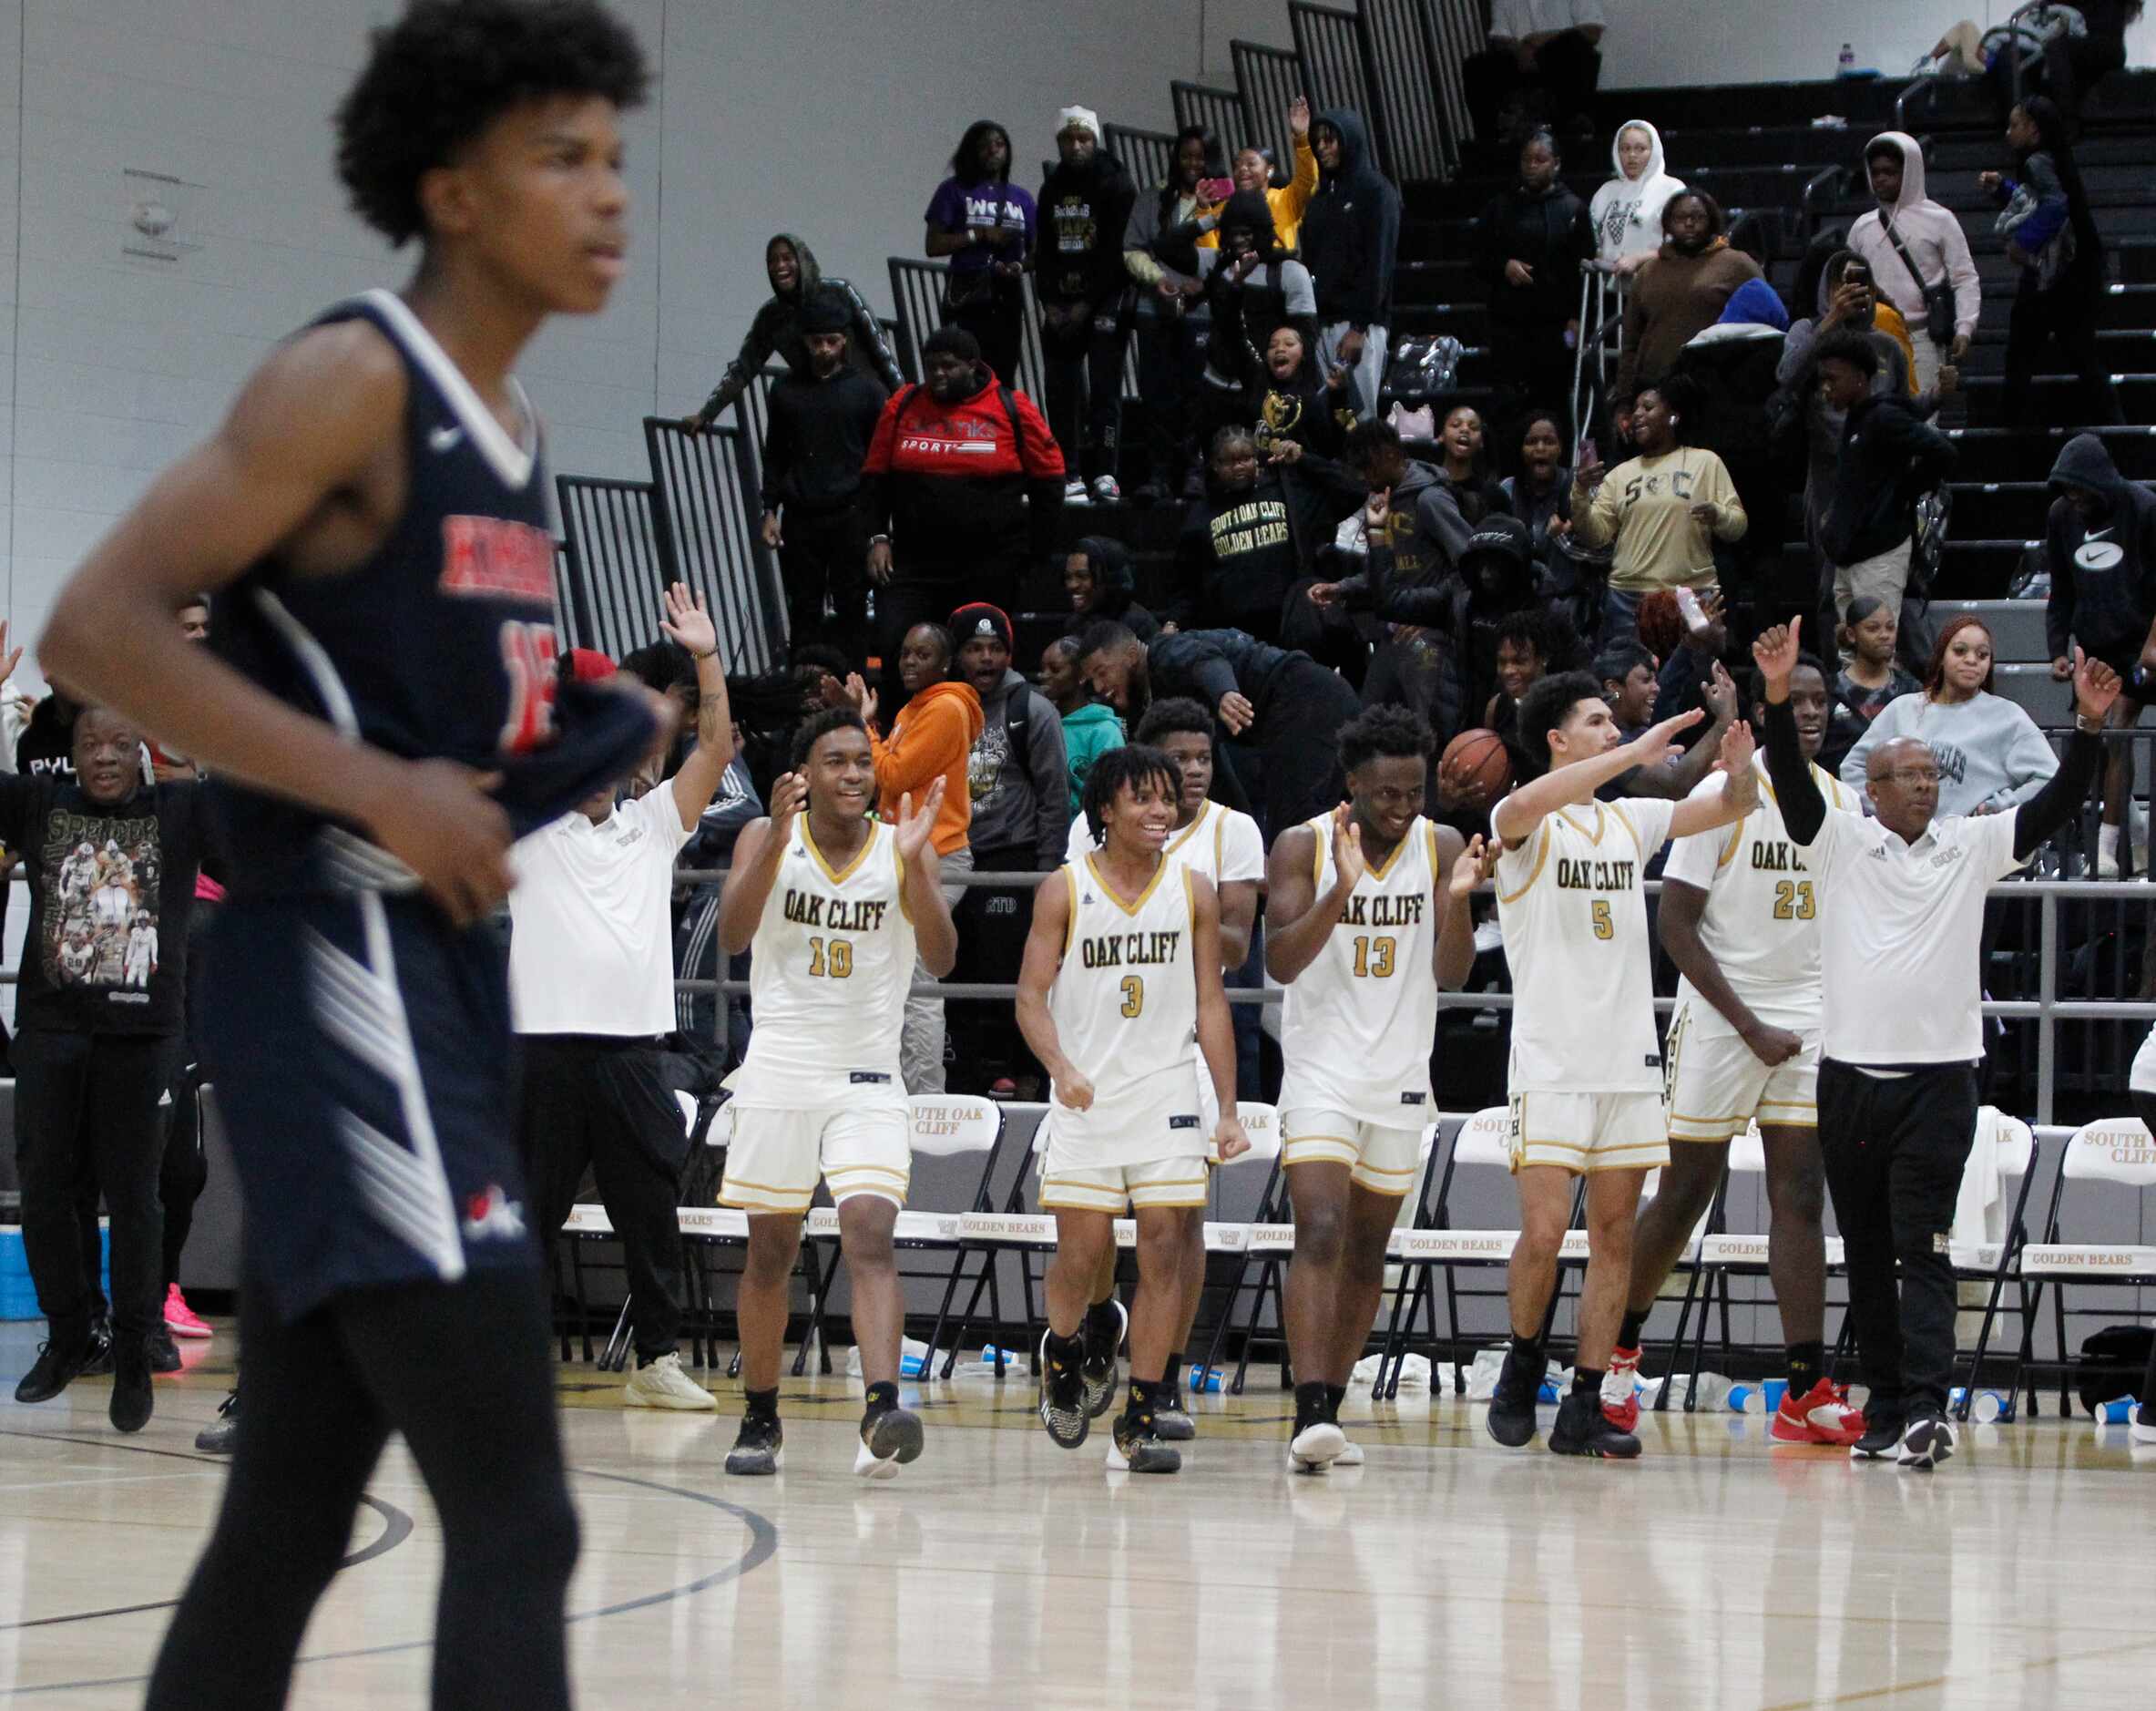 The South Oak Cliff bench reacts after the final buzzer sounded in their 53-50 victory over...